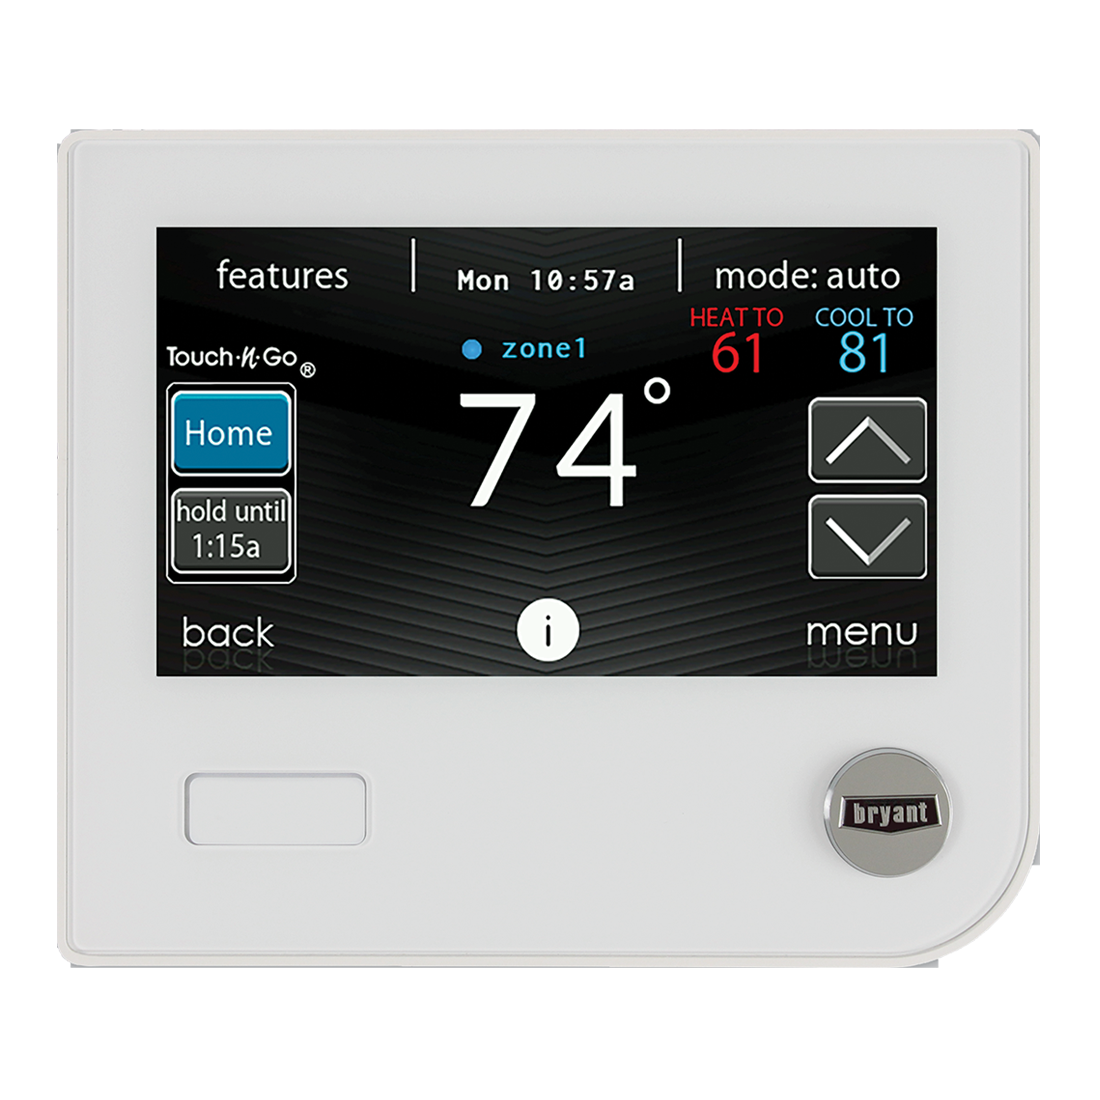 heating and air conditioning controls